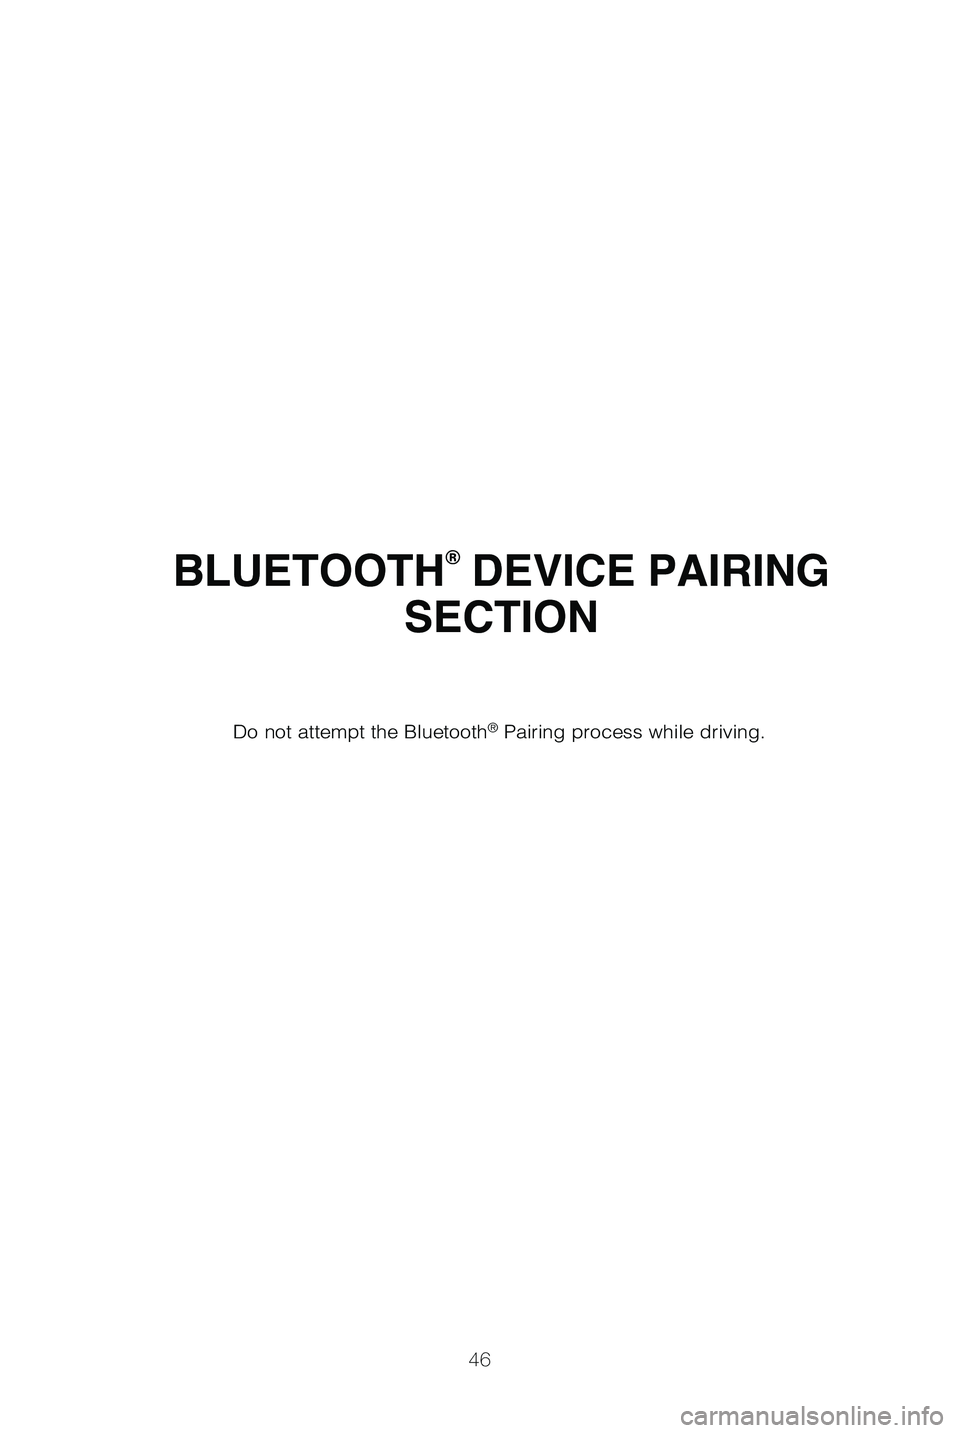 TOYOTA SEQUOIA 2019   (in English) Service Manual 46
BLUETOOTH® DEVICE PAIRING 
SECTION
Do not attempt the Bluetooth® Pairing process while driving.
49195b_MY19_Sequoia_QRG_V1_ML_0718.indd   467/31/18   10:05 PM 